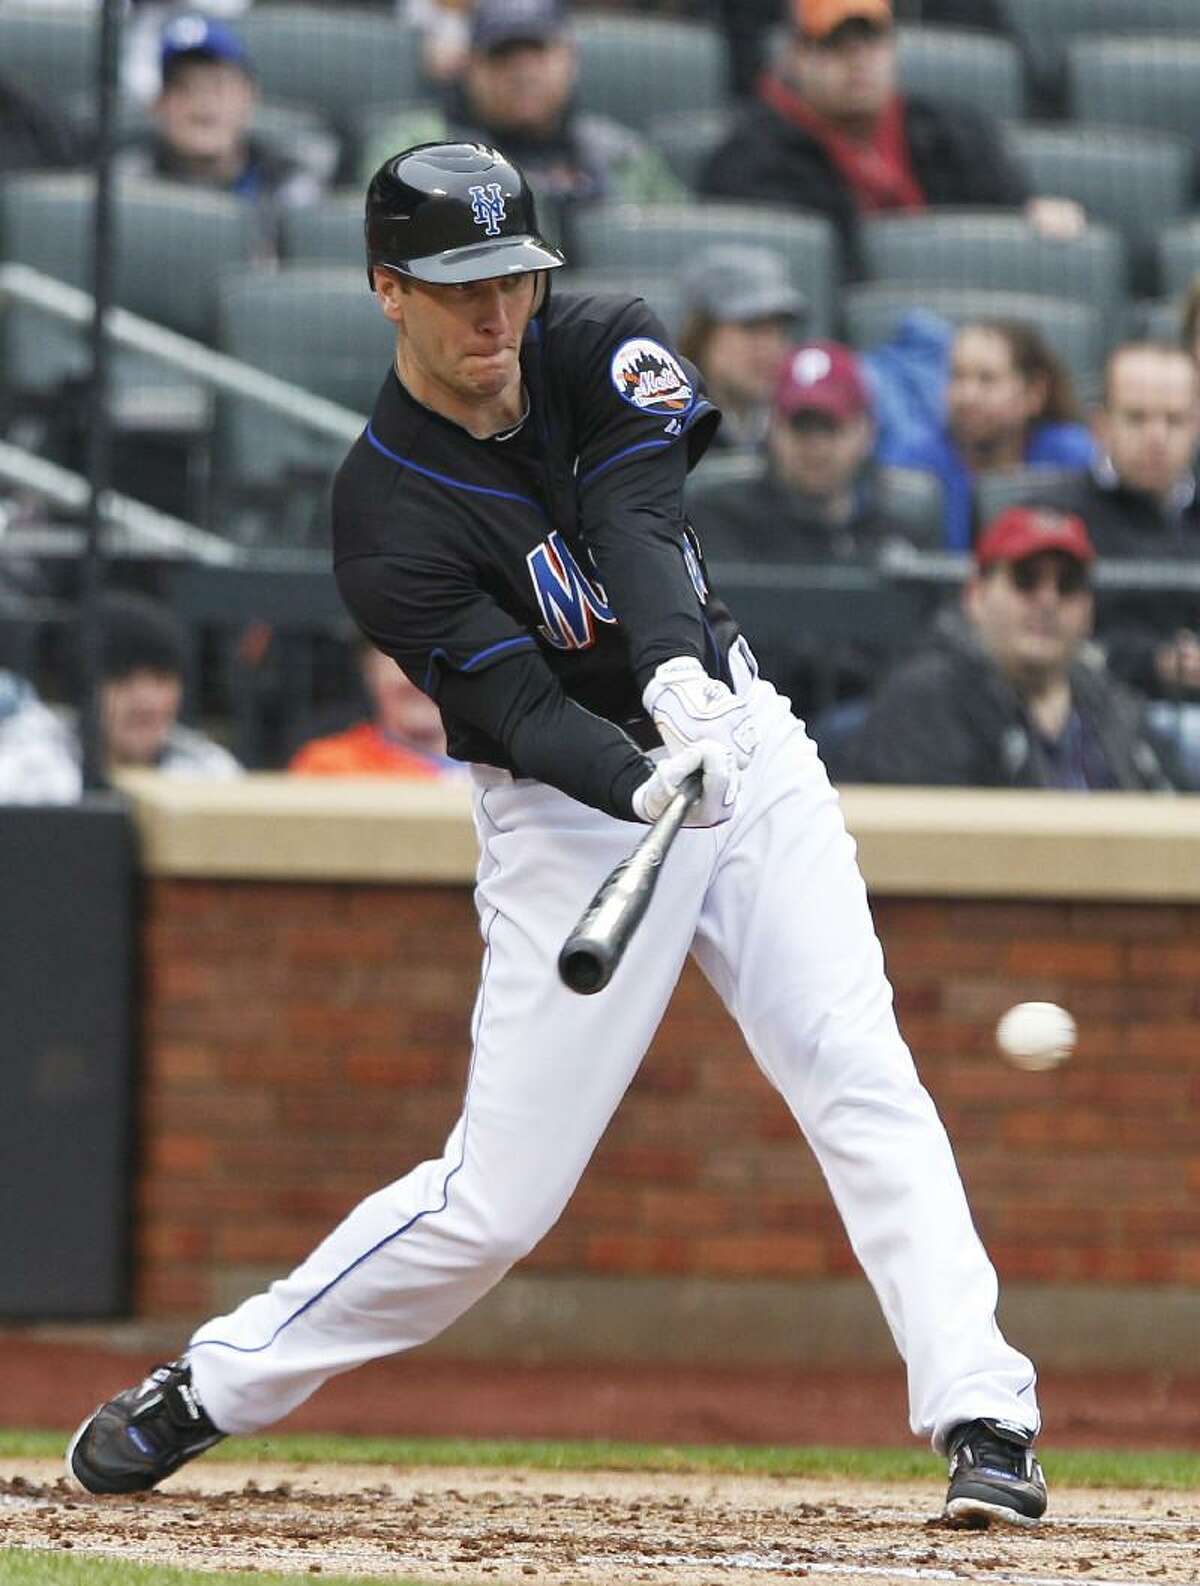 ASSOCIATED PRESS New York's Jason Bay follows through on a two-run single during the first inning of Saturday's game at CitiField in New York. Bay also homered in the game, won by the Mets 6-4.